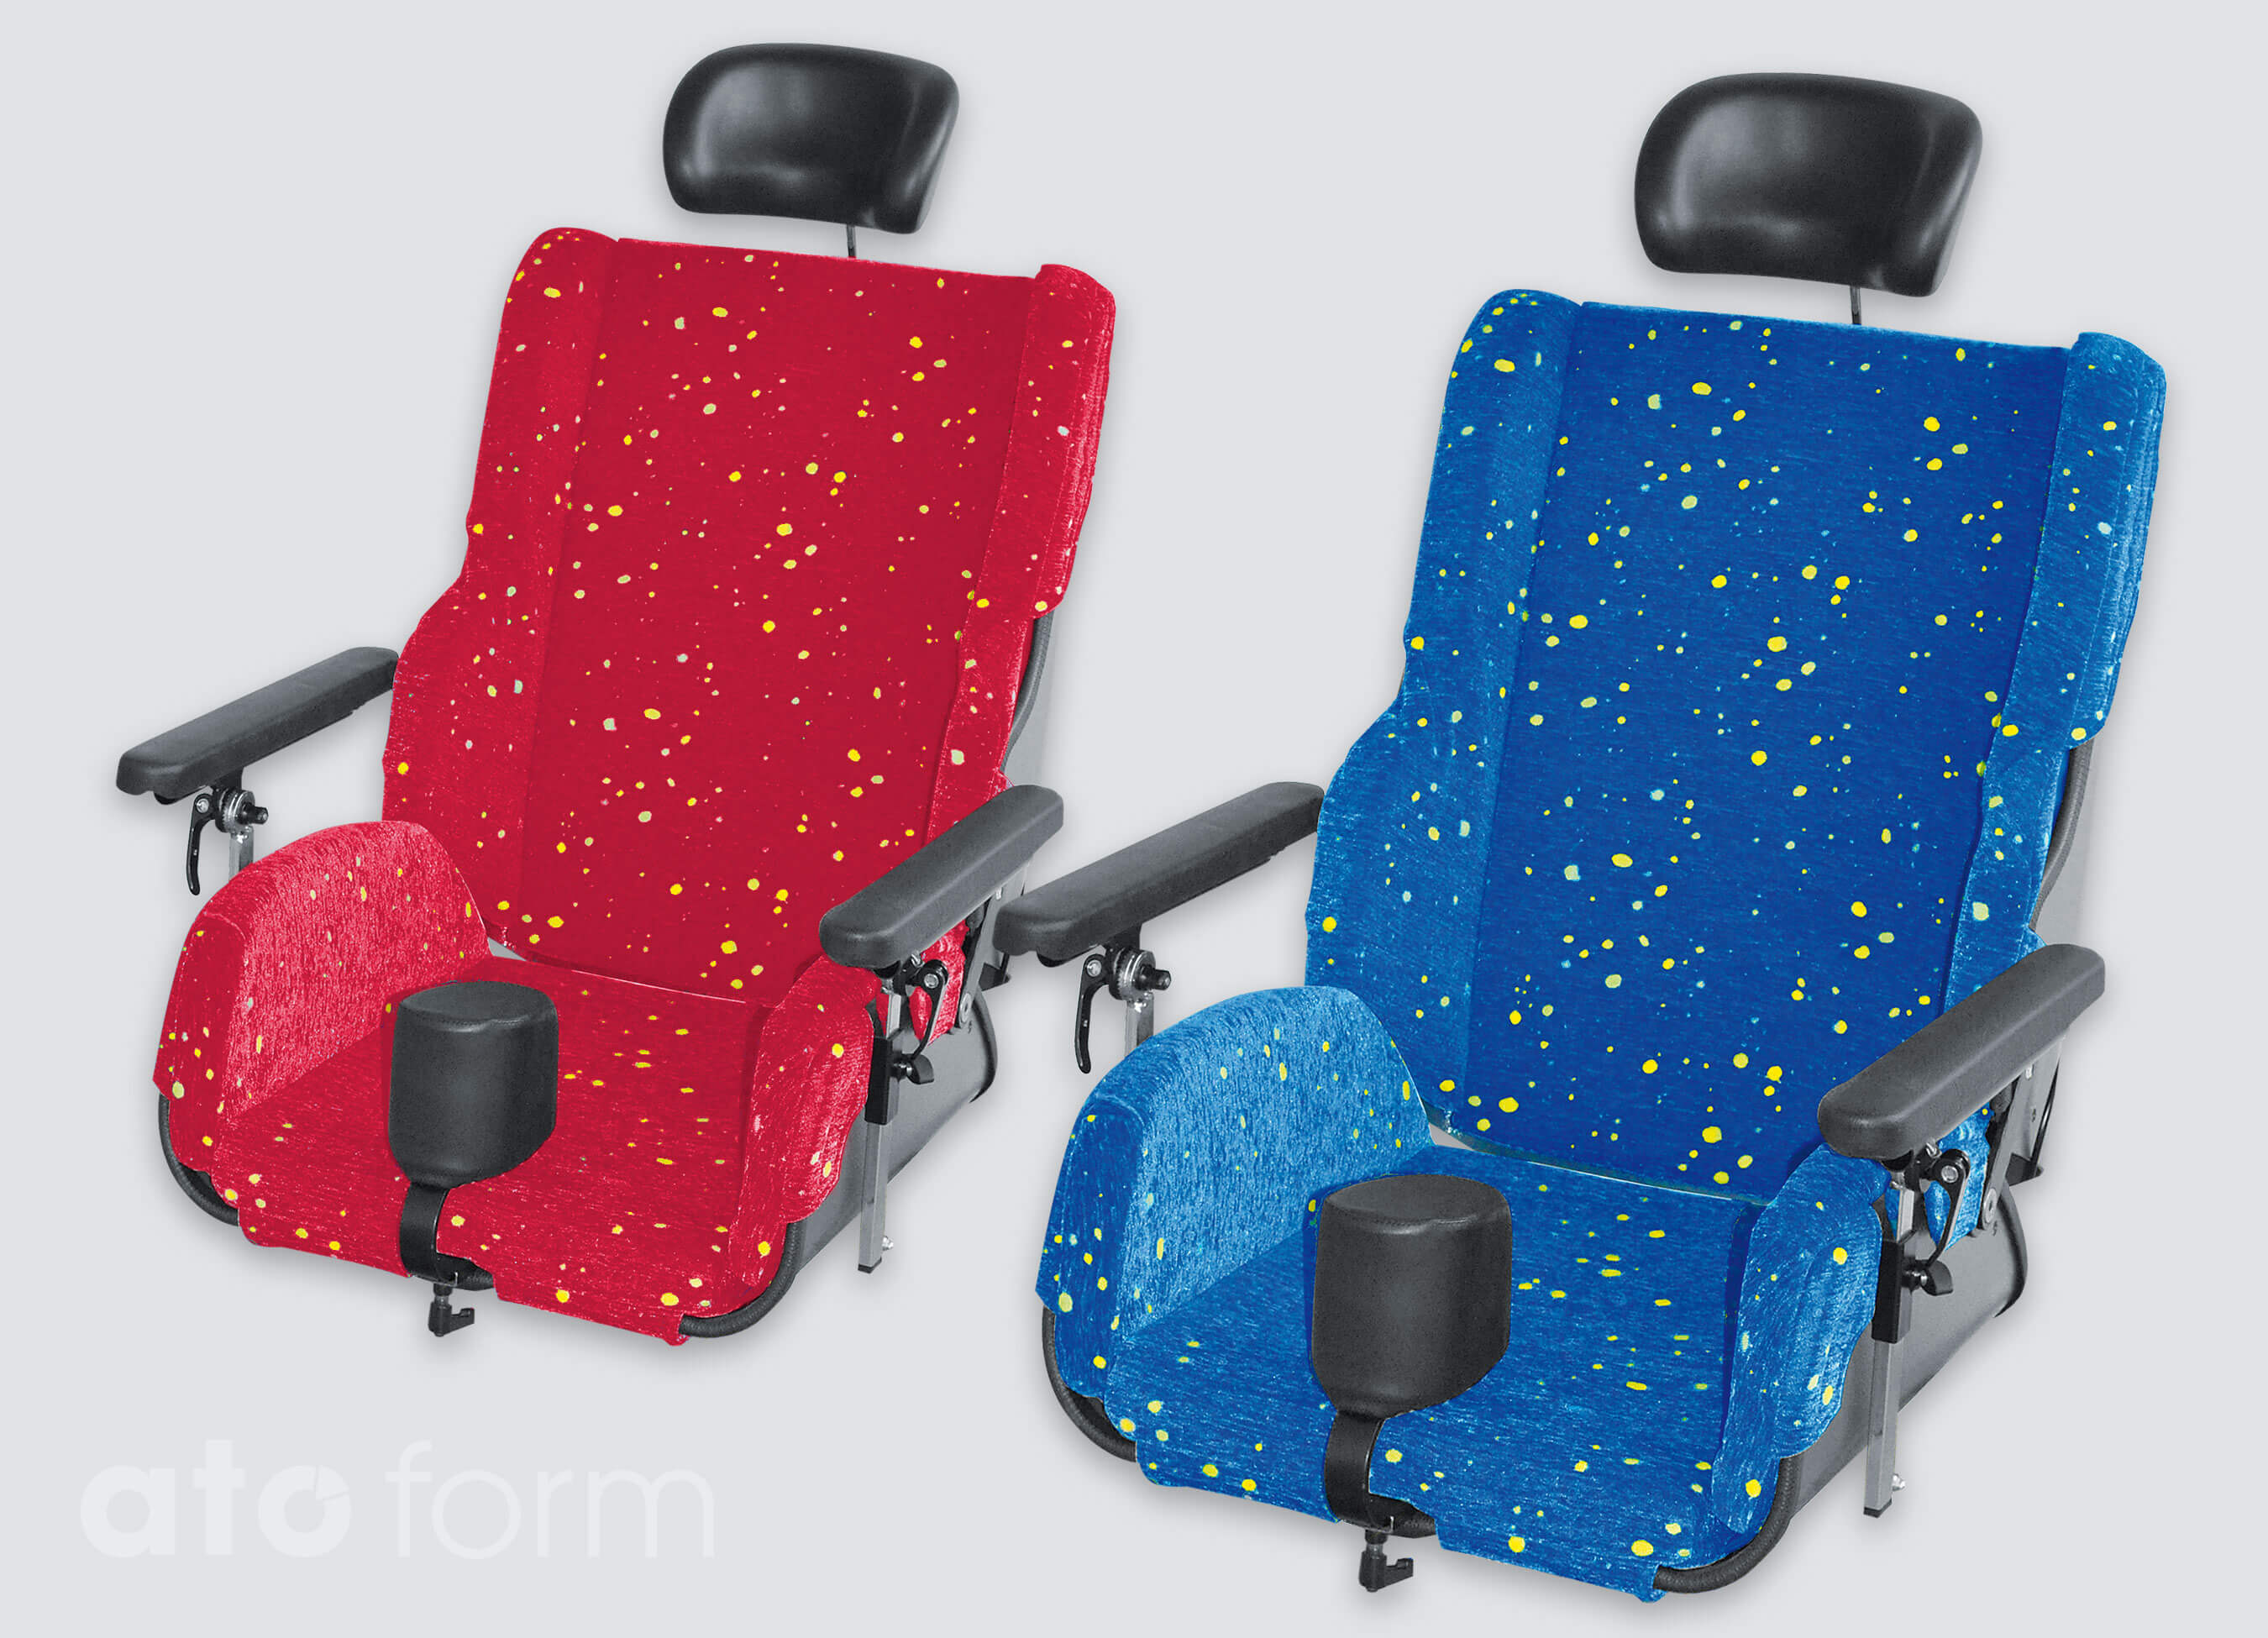 Modular seat Physio Punkt available in two colours